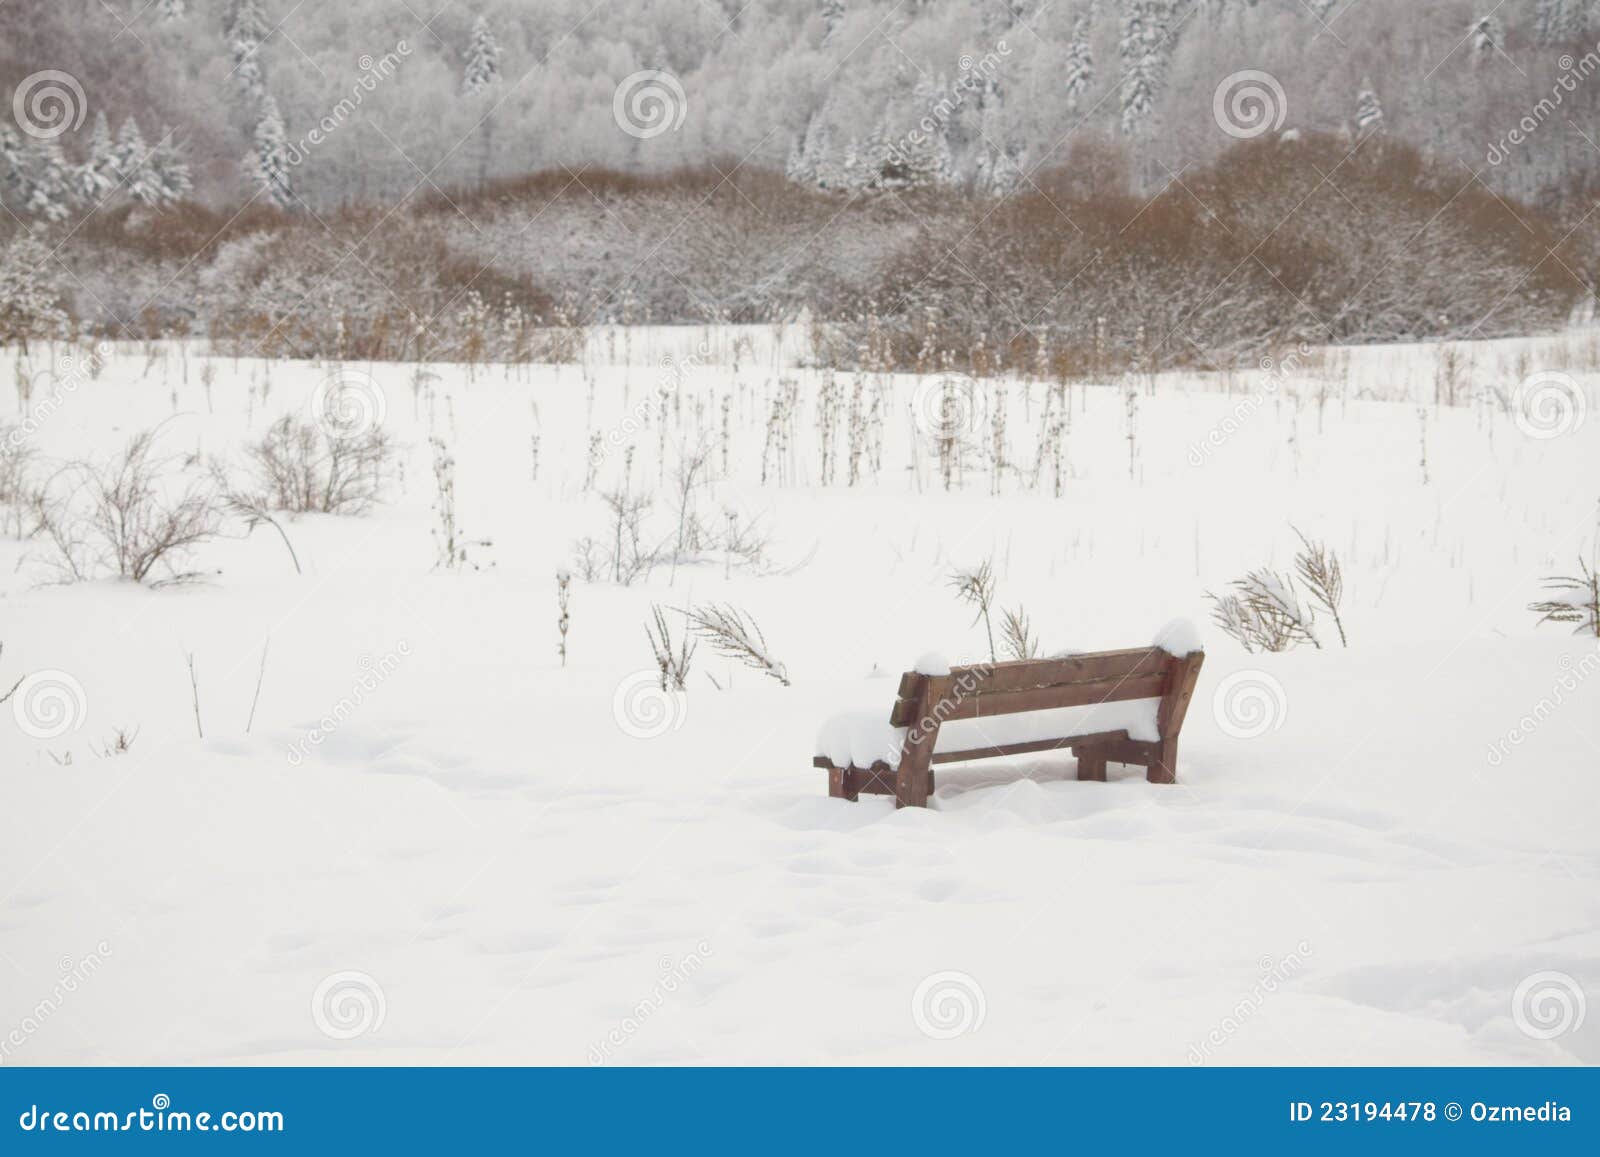 Royalty Free Stock Photos: Bench in a picnic field covered with snow